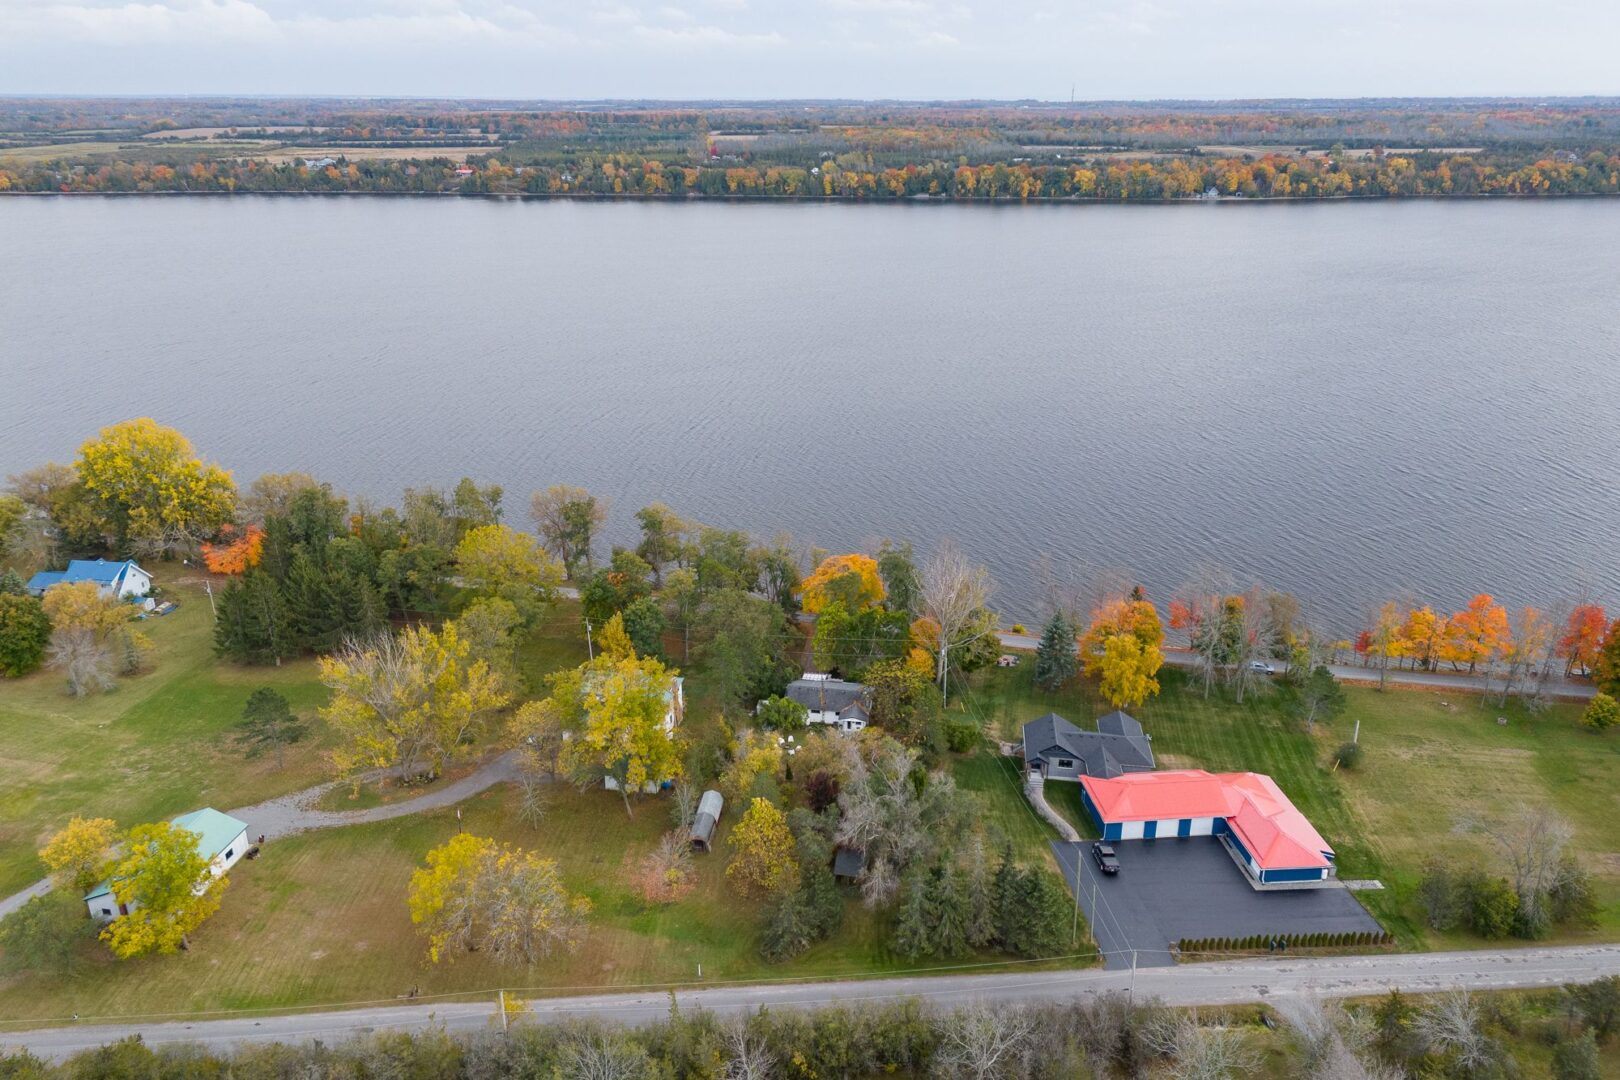 Overhead view of a stretch of lake, with a few houses lining the waterfront.